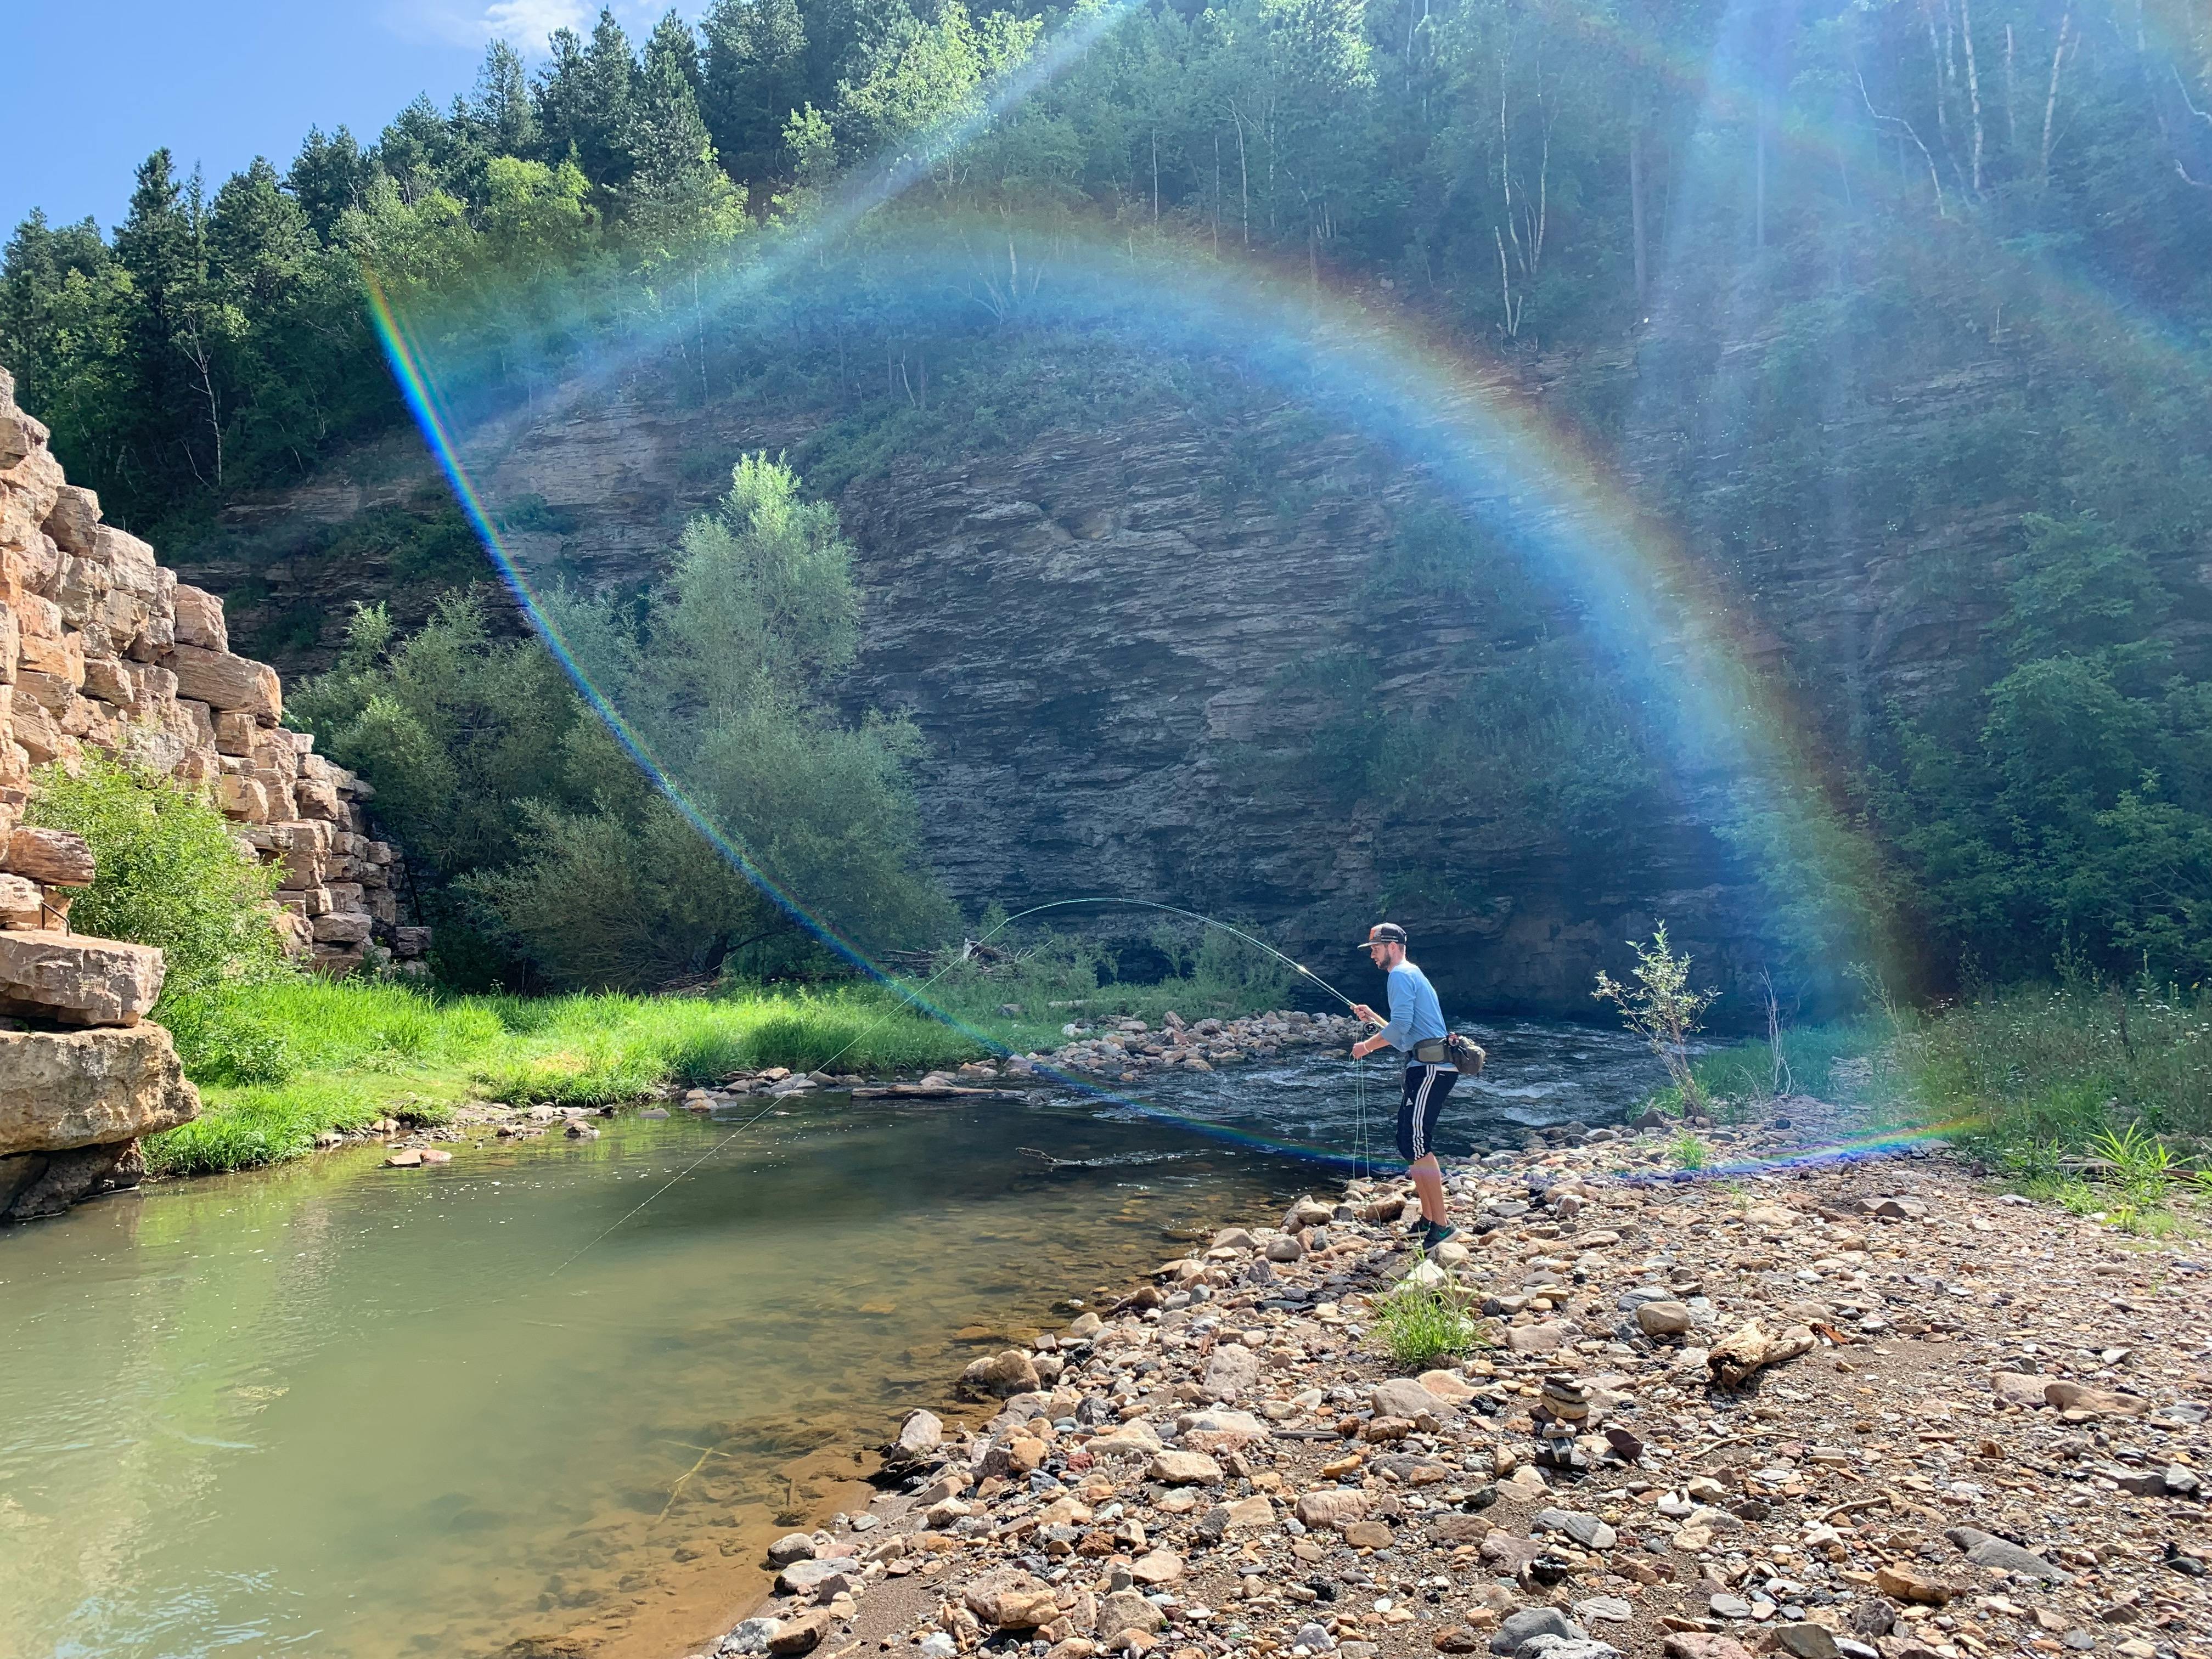 A man stands on the bank of a river and fly fishes. The banks are rocky and green and a rainbow from the lens curves over the scene.